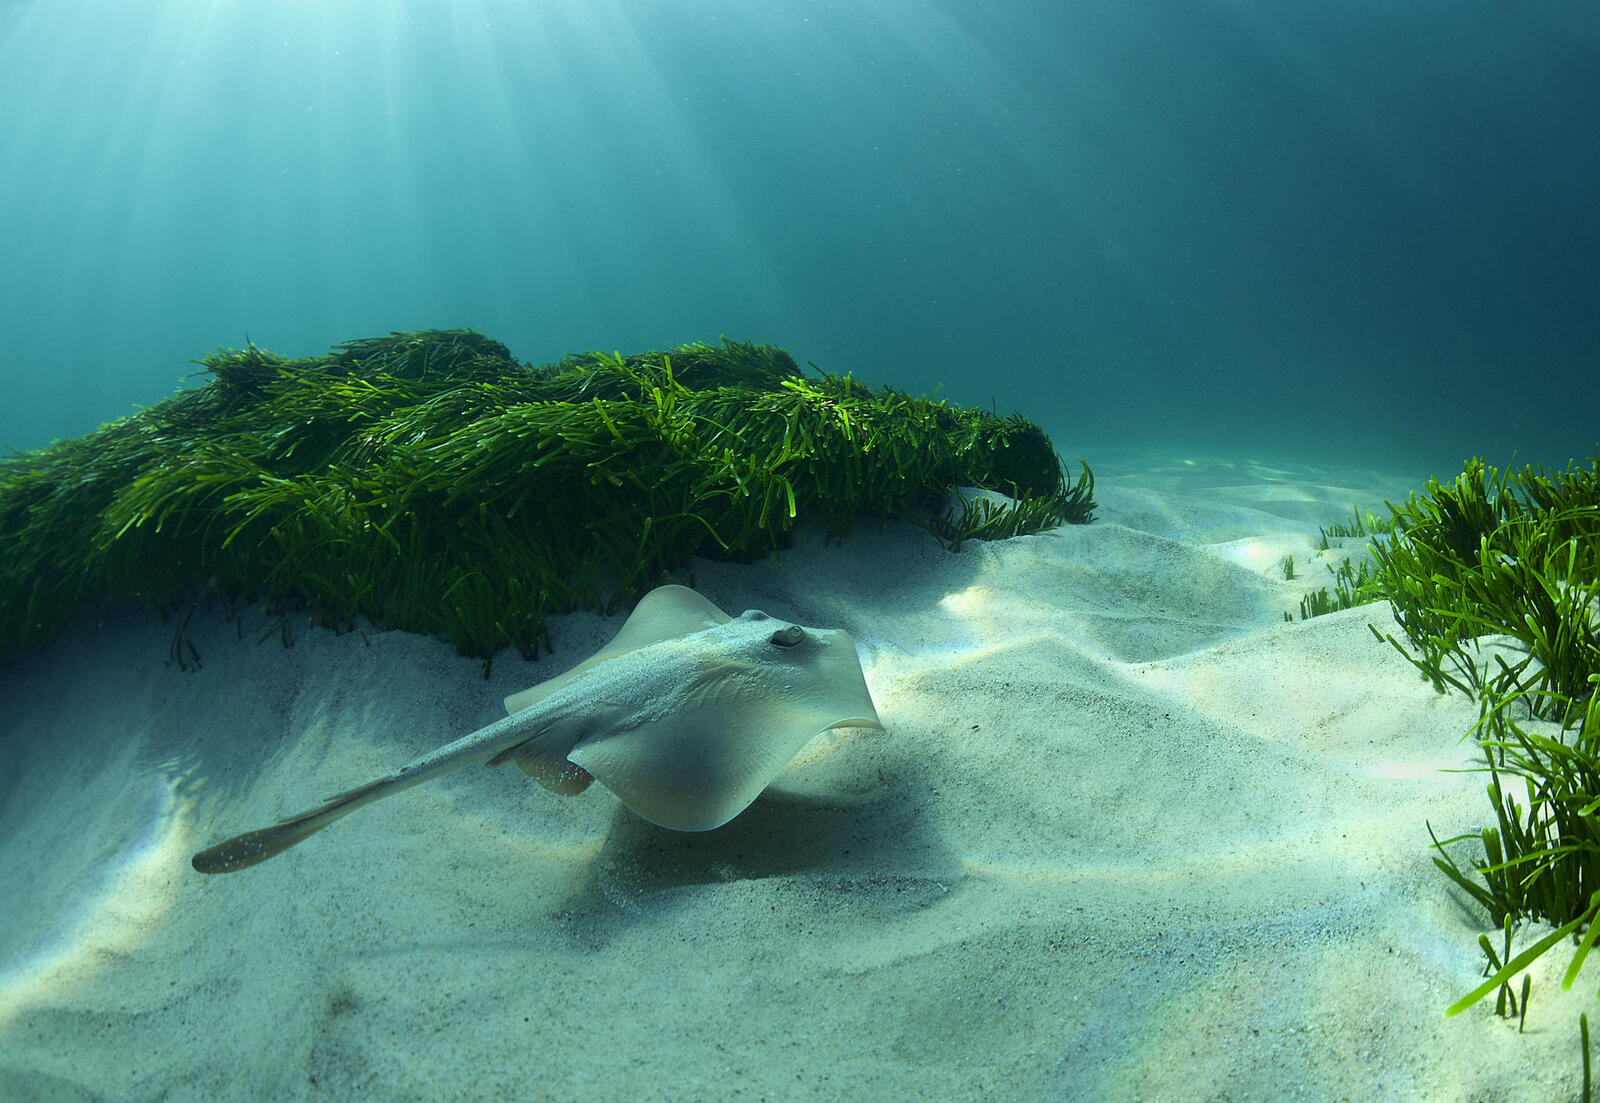 Wallpapers Sea seabed Stingray on the desktop